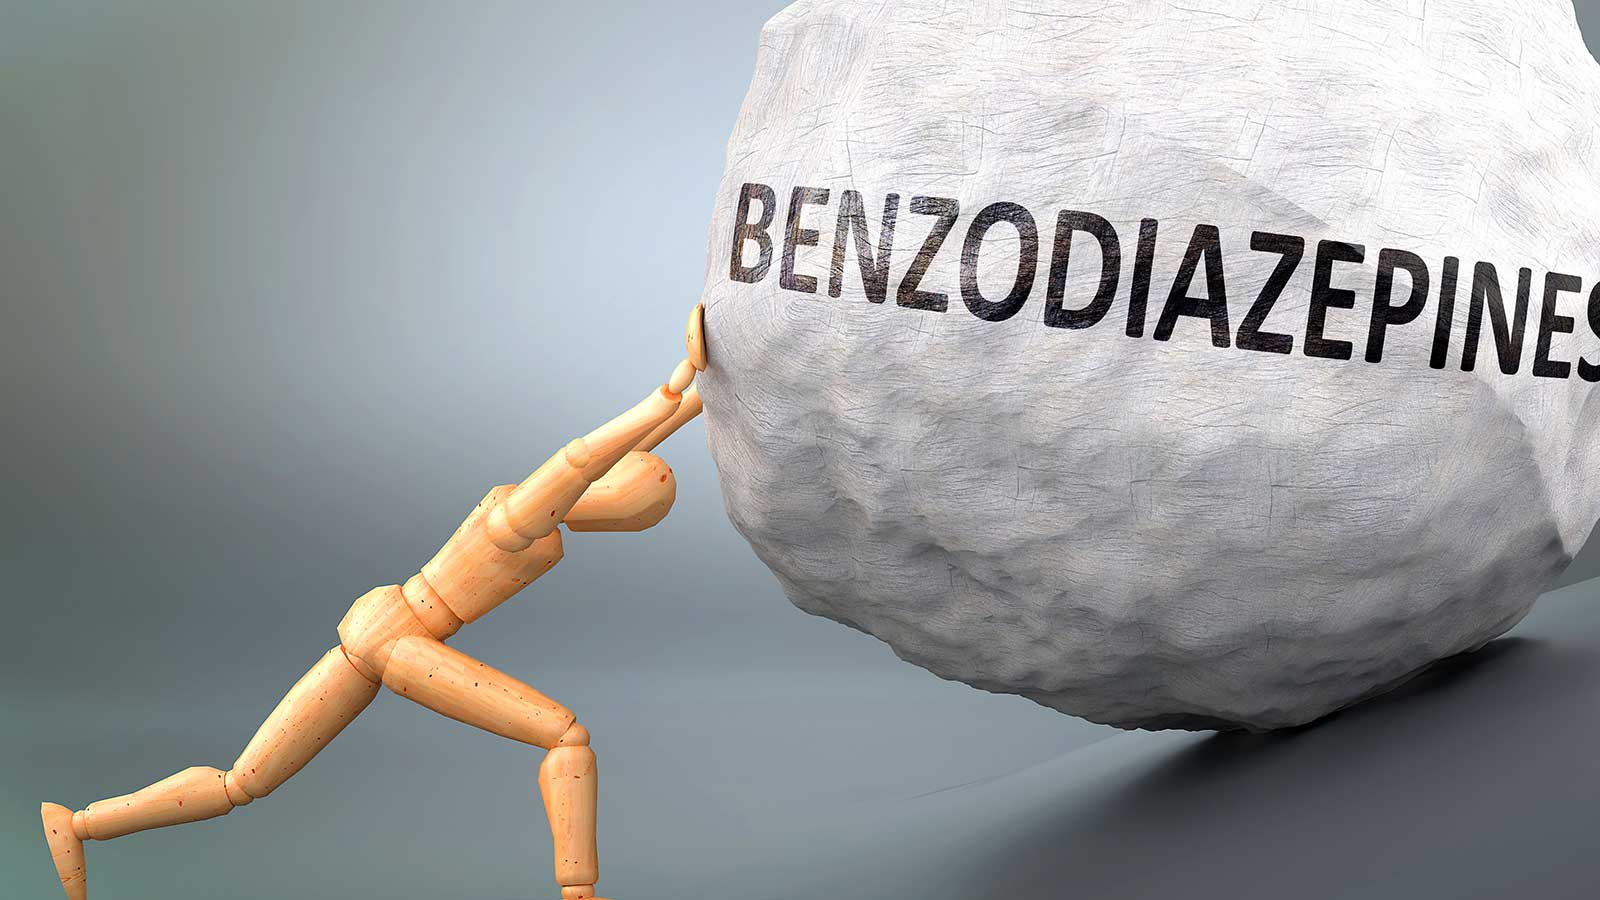 A symbolic representation of fighting a benzodiazepine dependence